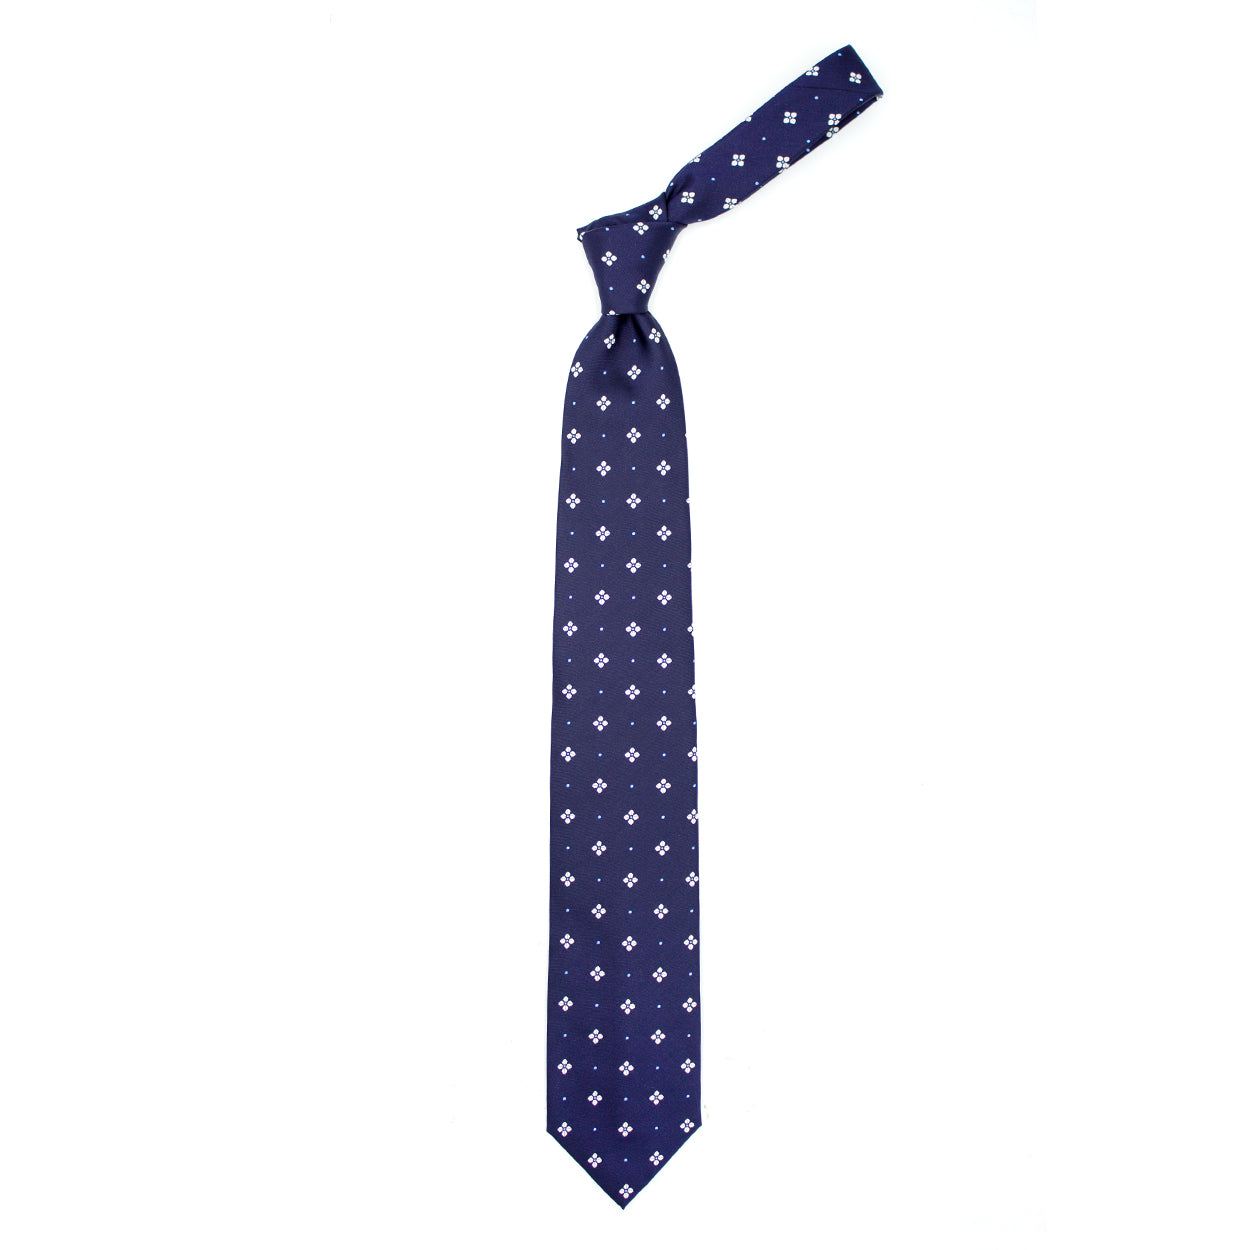 Blue tie with white flowers and blue dots